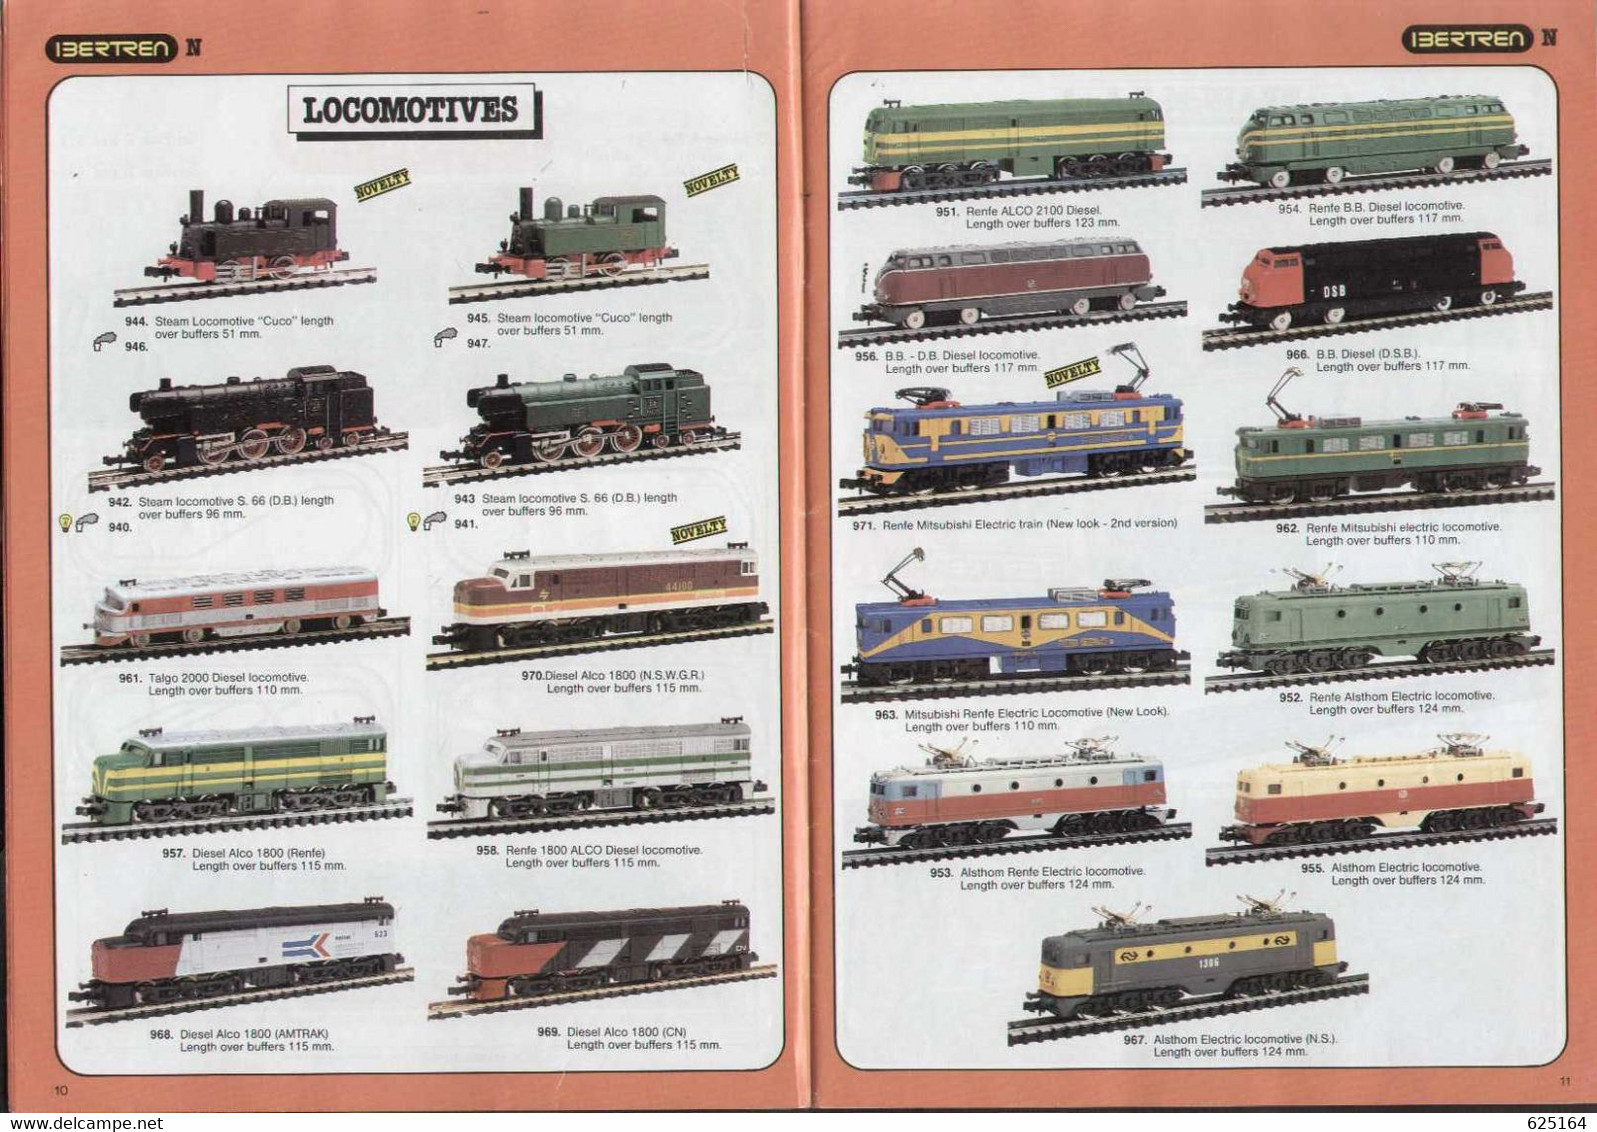 Catalogue IBERTREN 1985  N Scale (1:160) & HO Scale (1:87) English Edition - Inglés